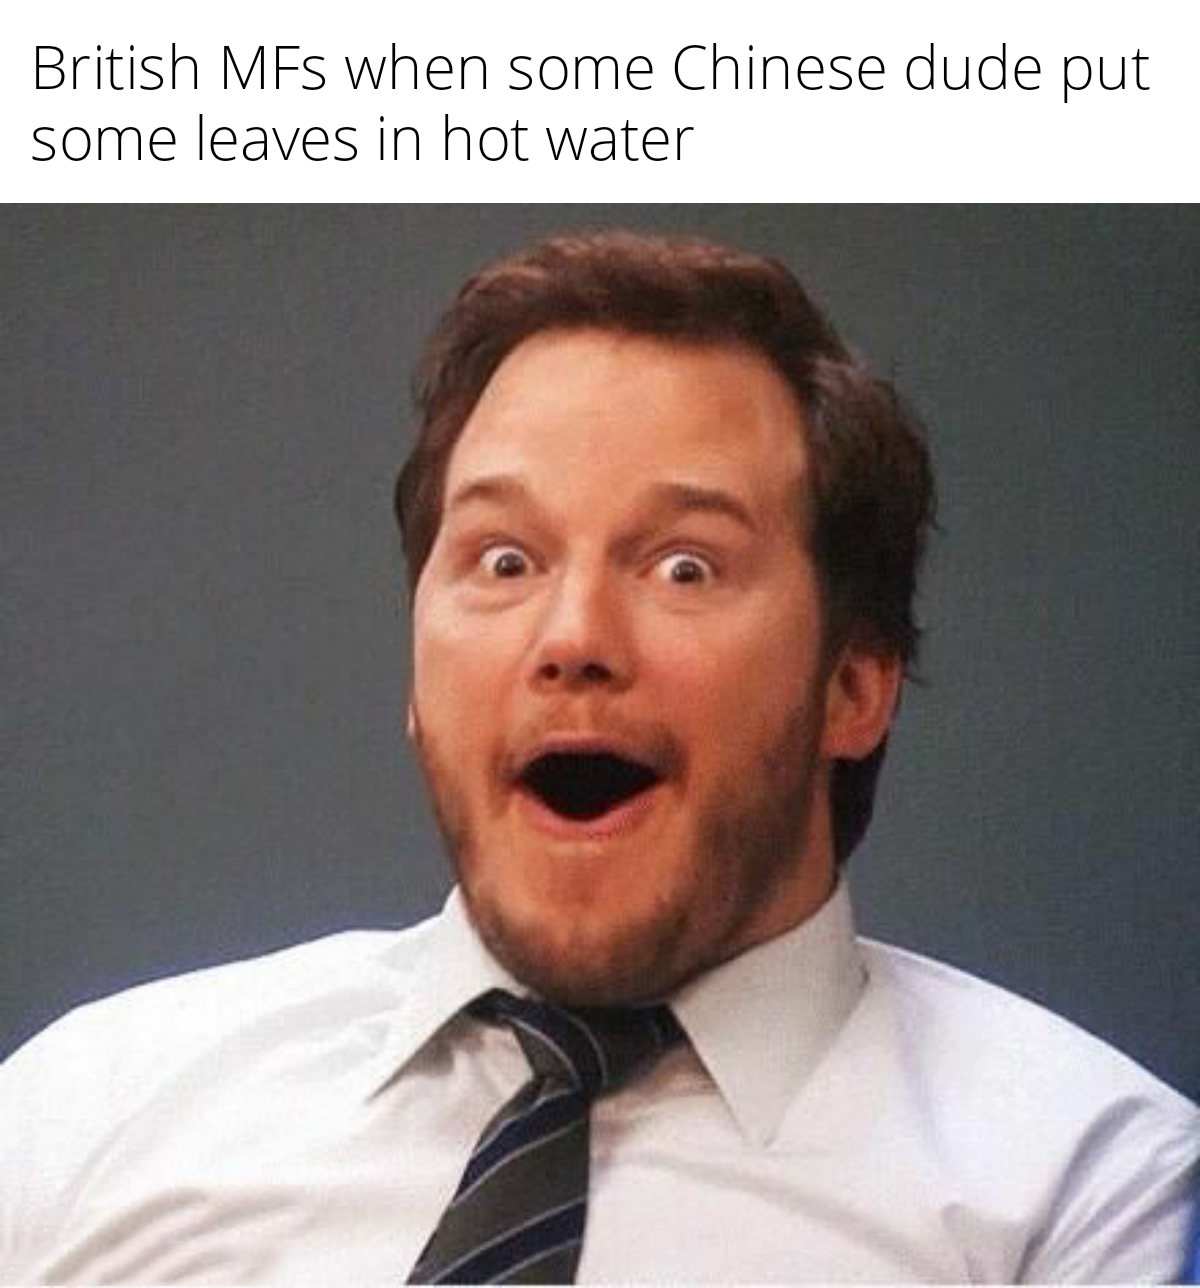 funny memes - new experience meme - British MFs when some Chinese dude put some leaves in hot water